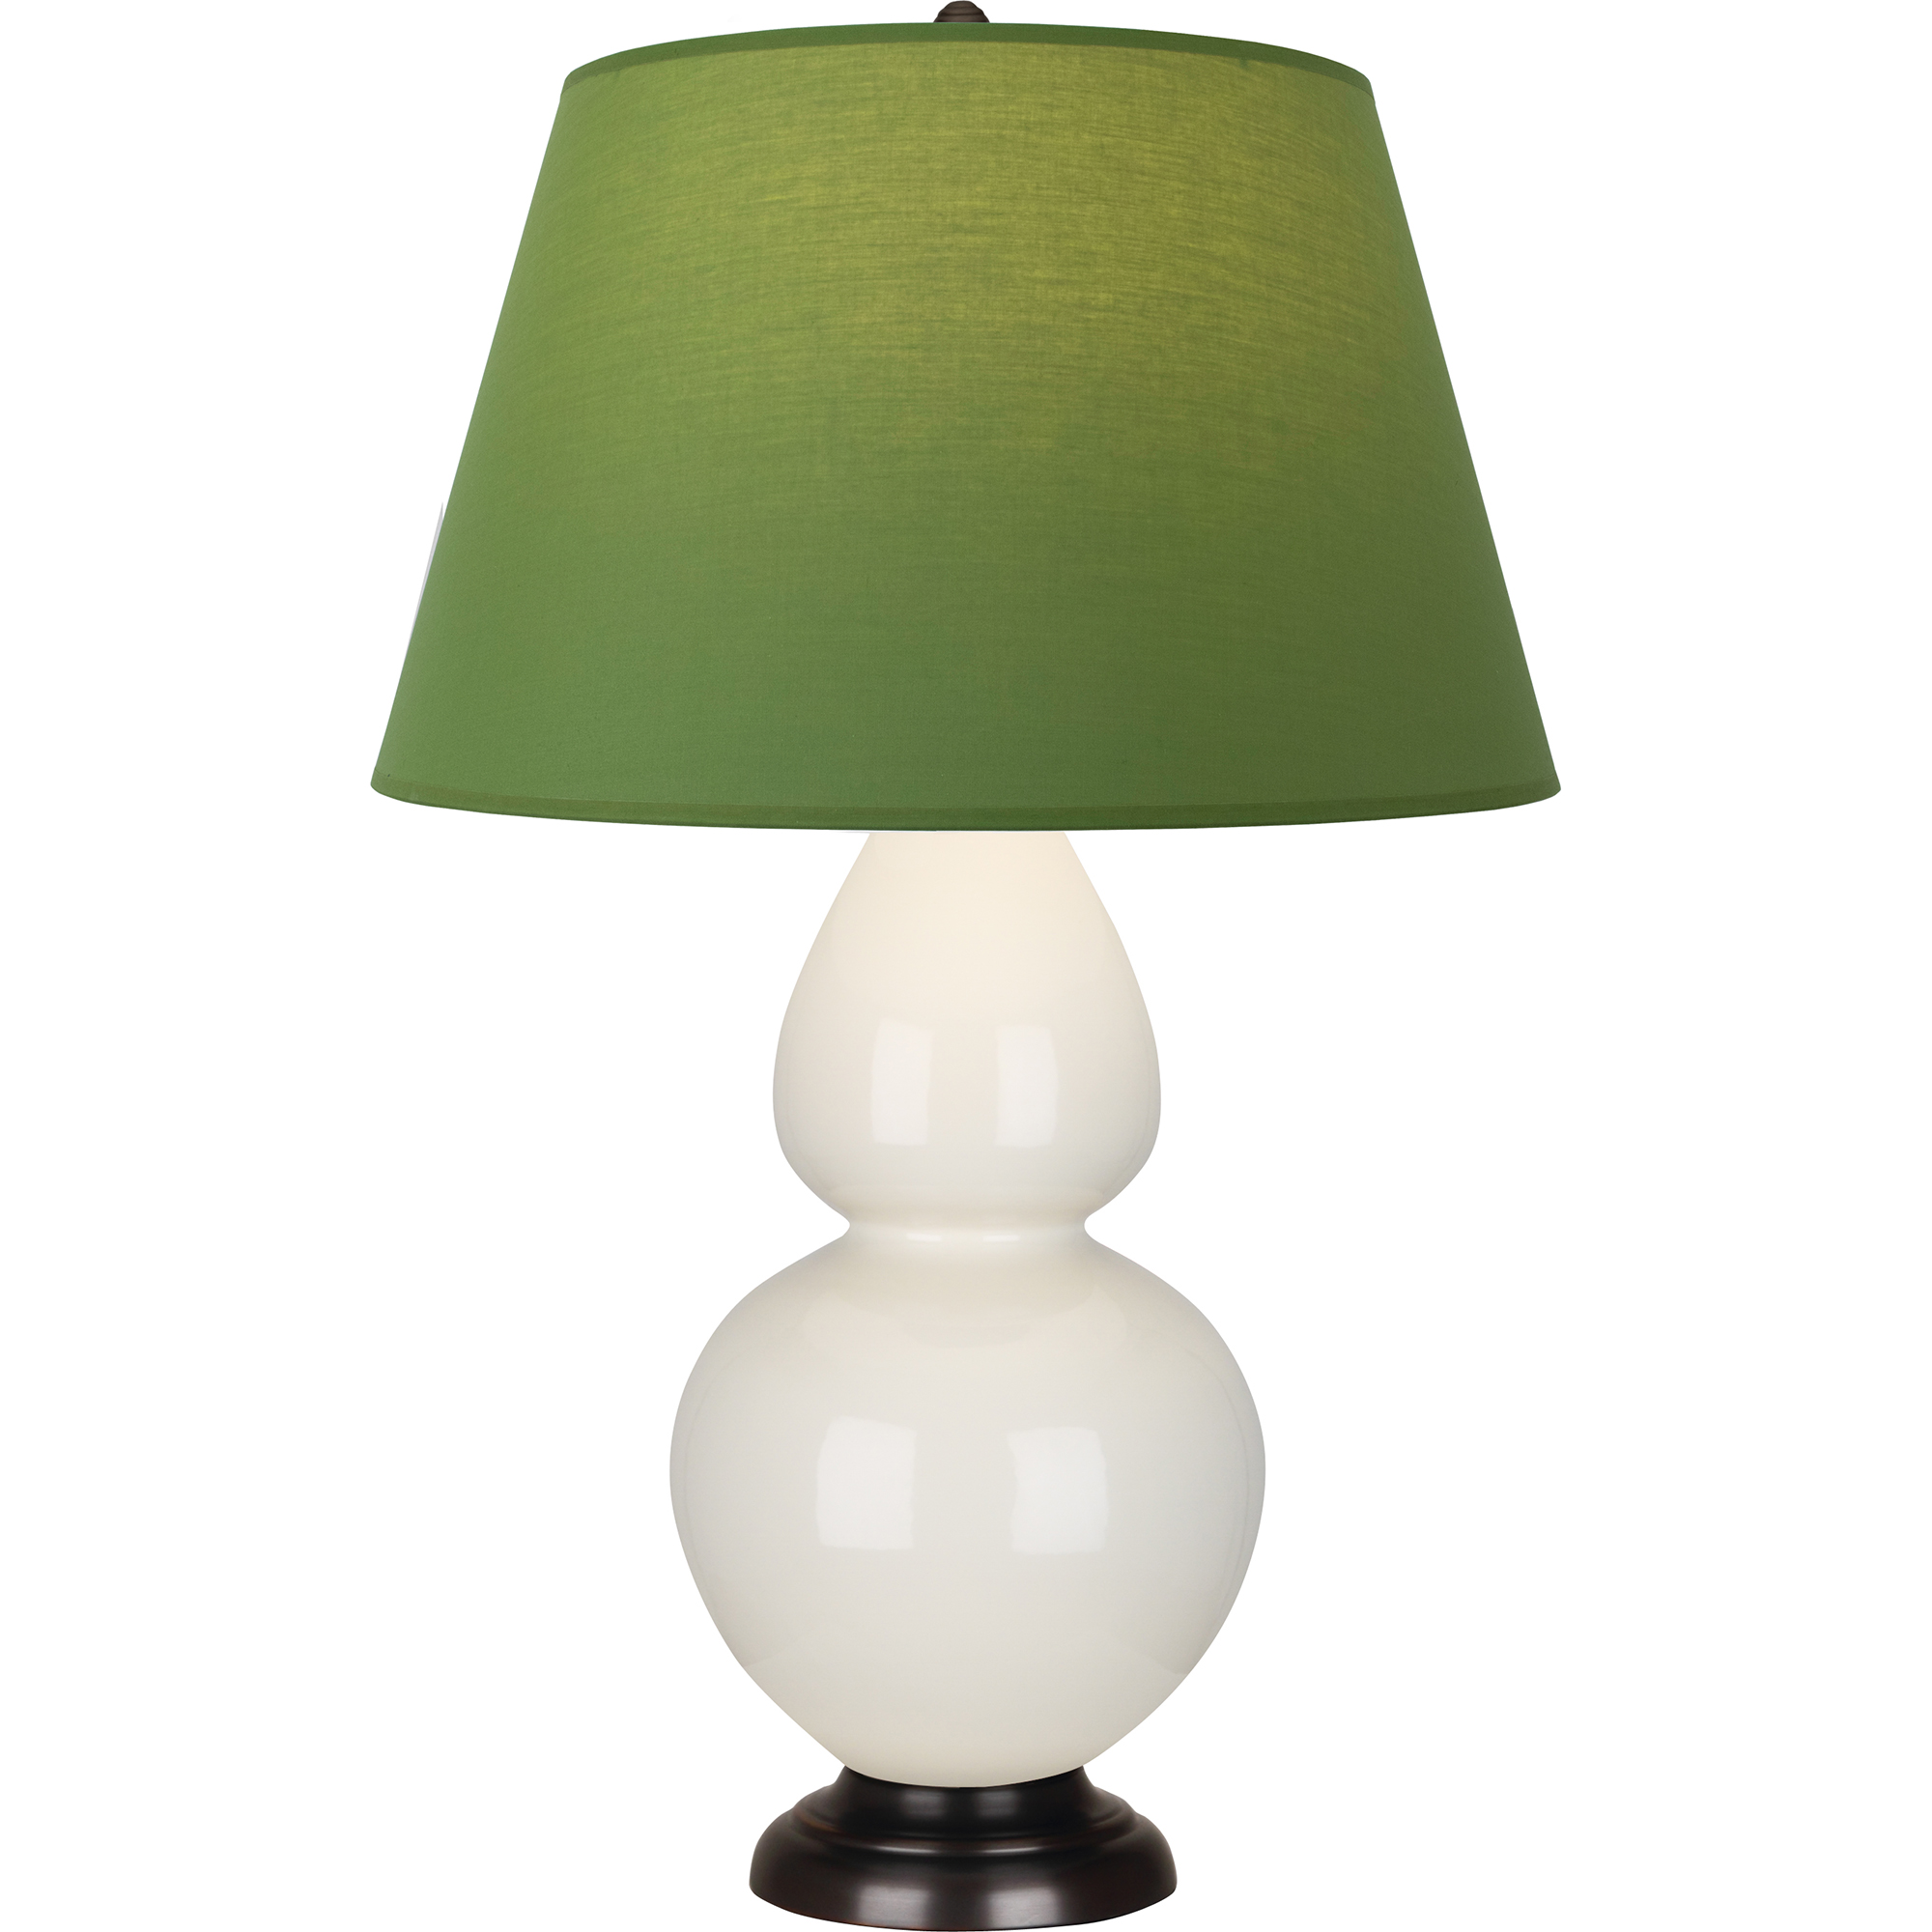 Double Gourd Table Lamp Style #1755G